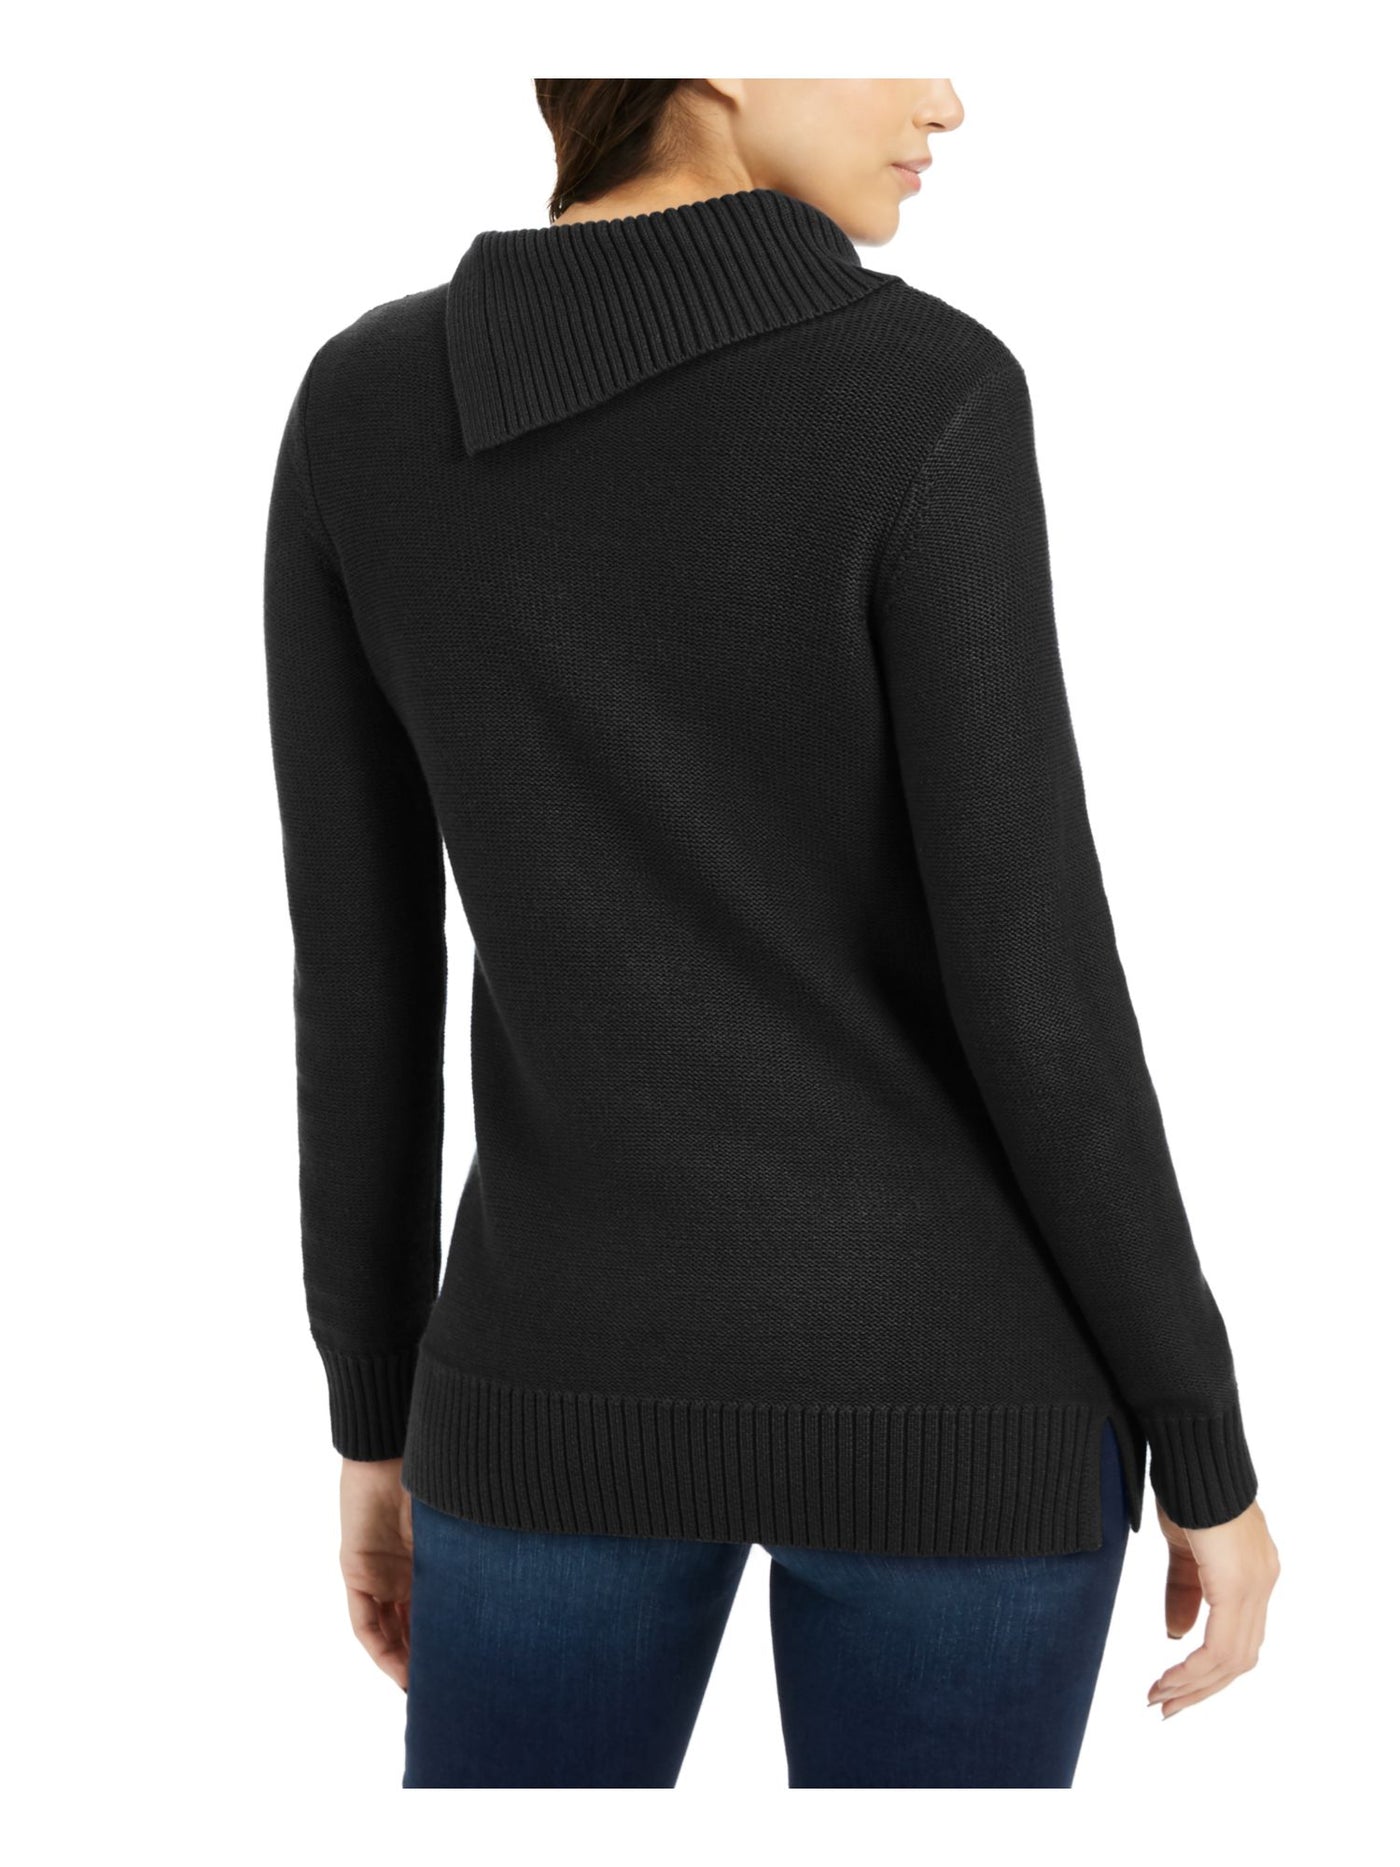 CHARTER CLUB Womens Black Ribbed Heather Long Sleeve Cowl Neck Sweater S